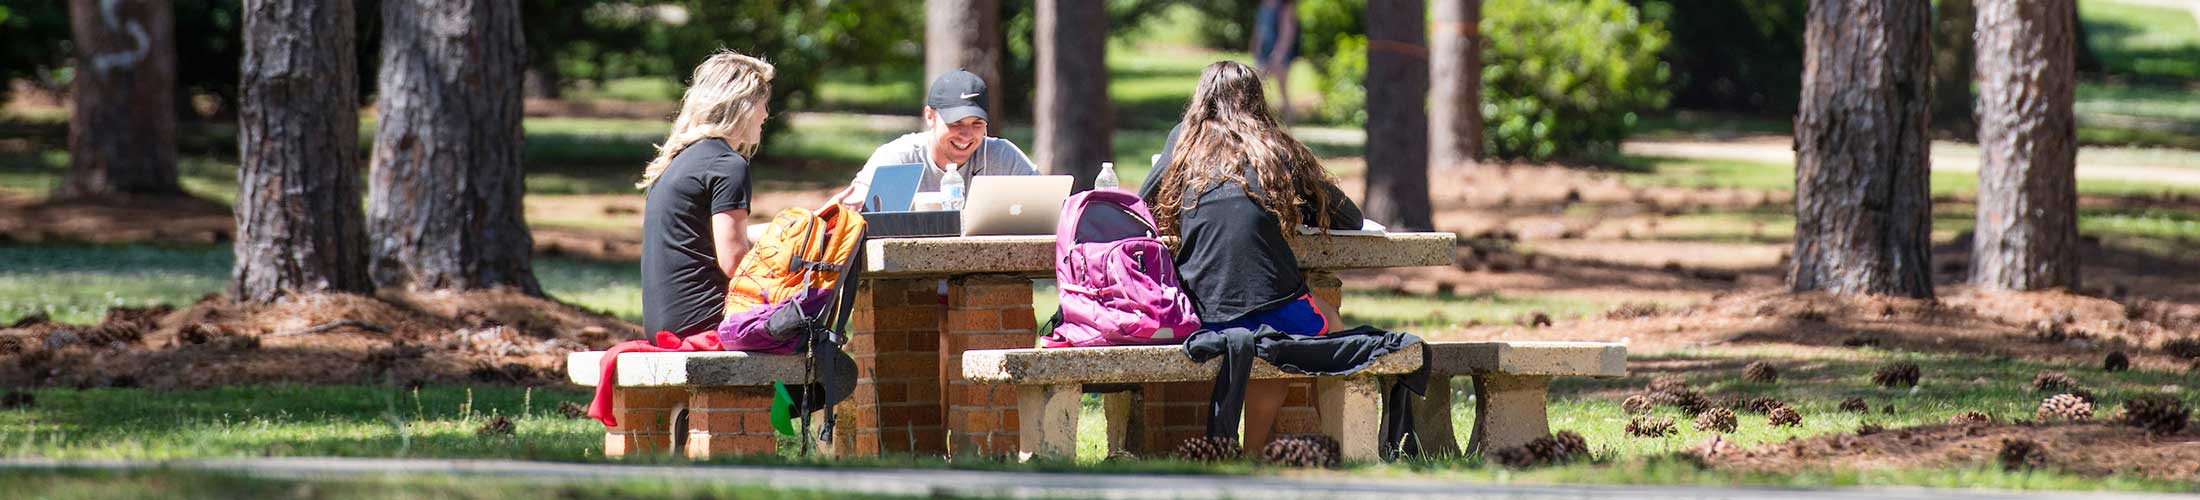 Students studying at a table outdoors on campus.